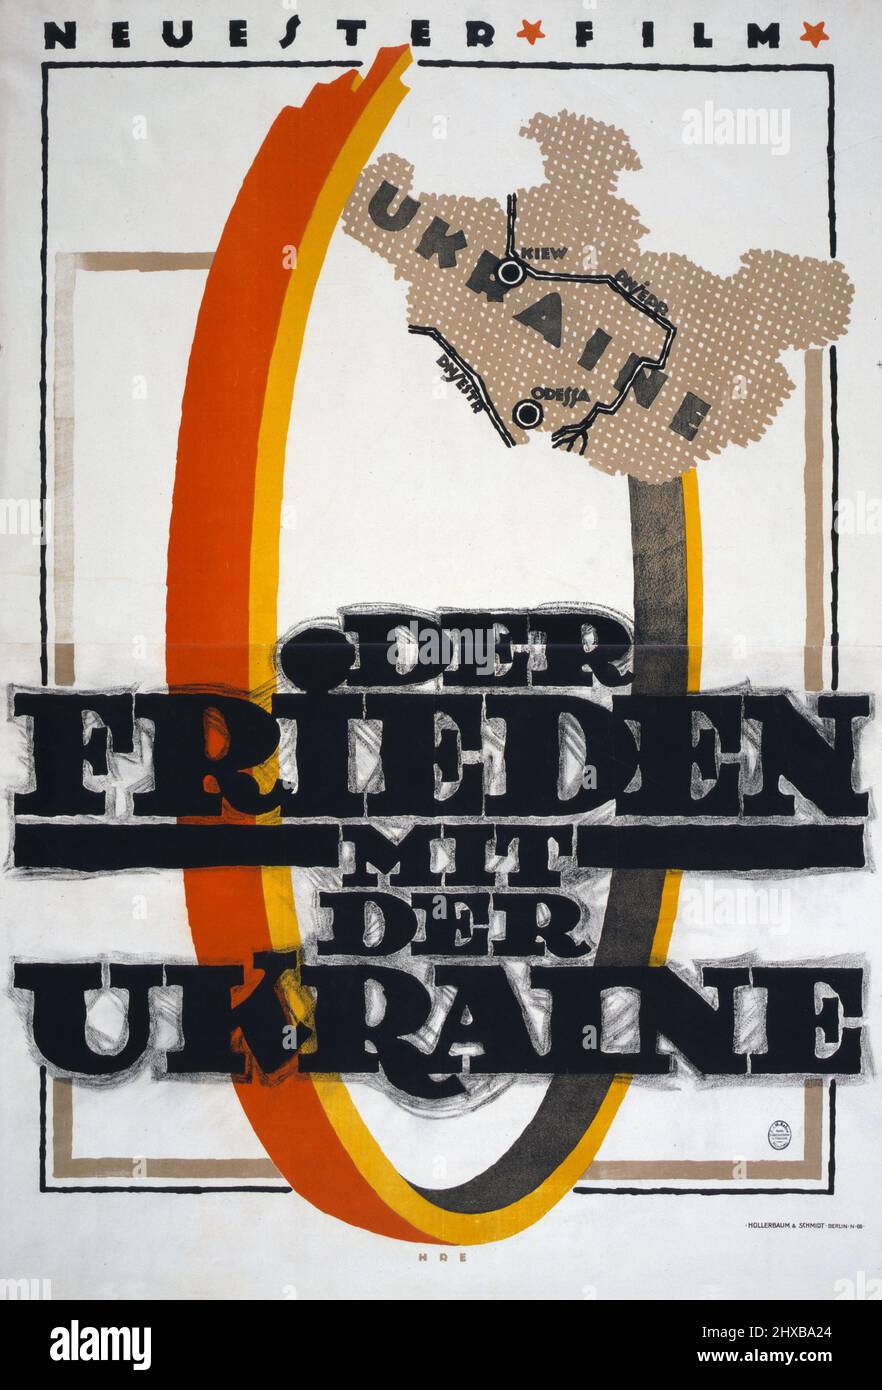 Der Frieden mit der Ukraine. Neuester Film / HRE. Poster shows a stylized map of Ukraine and part of a large ring in German colors. 1918. Film poster. Stock Photo